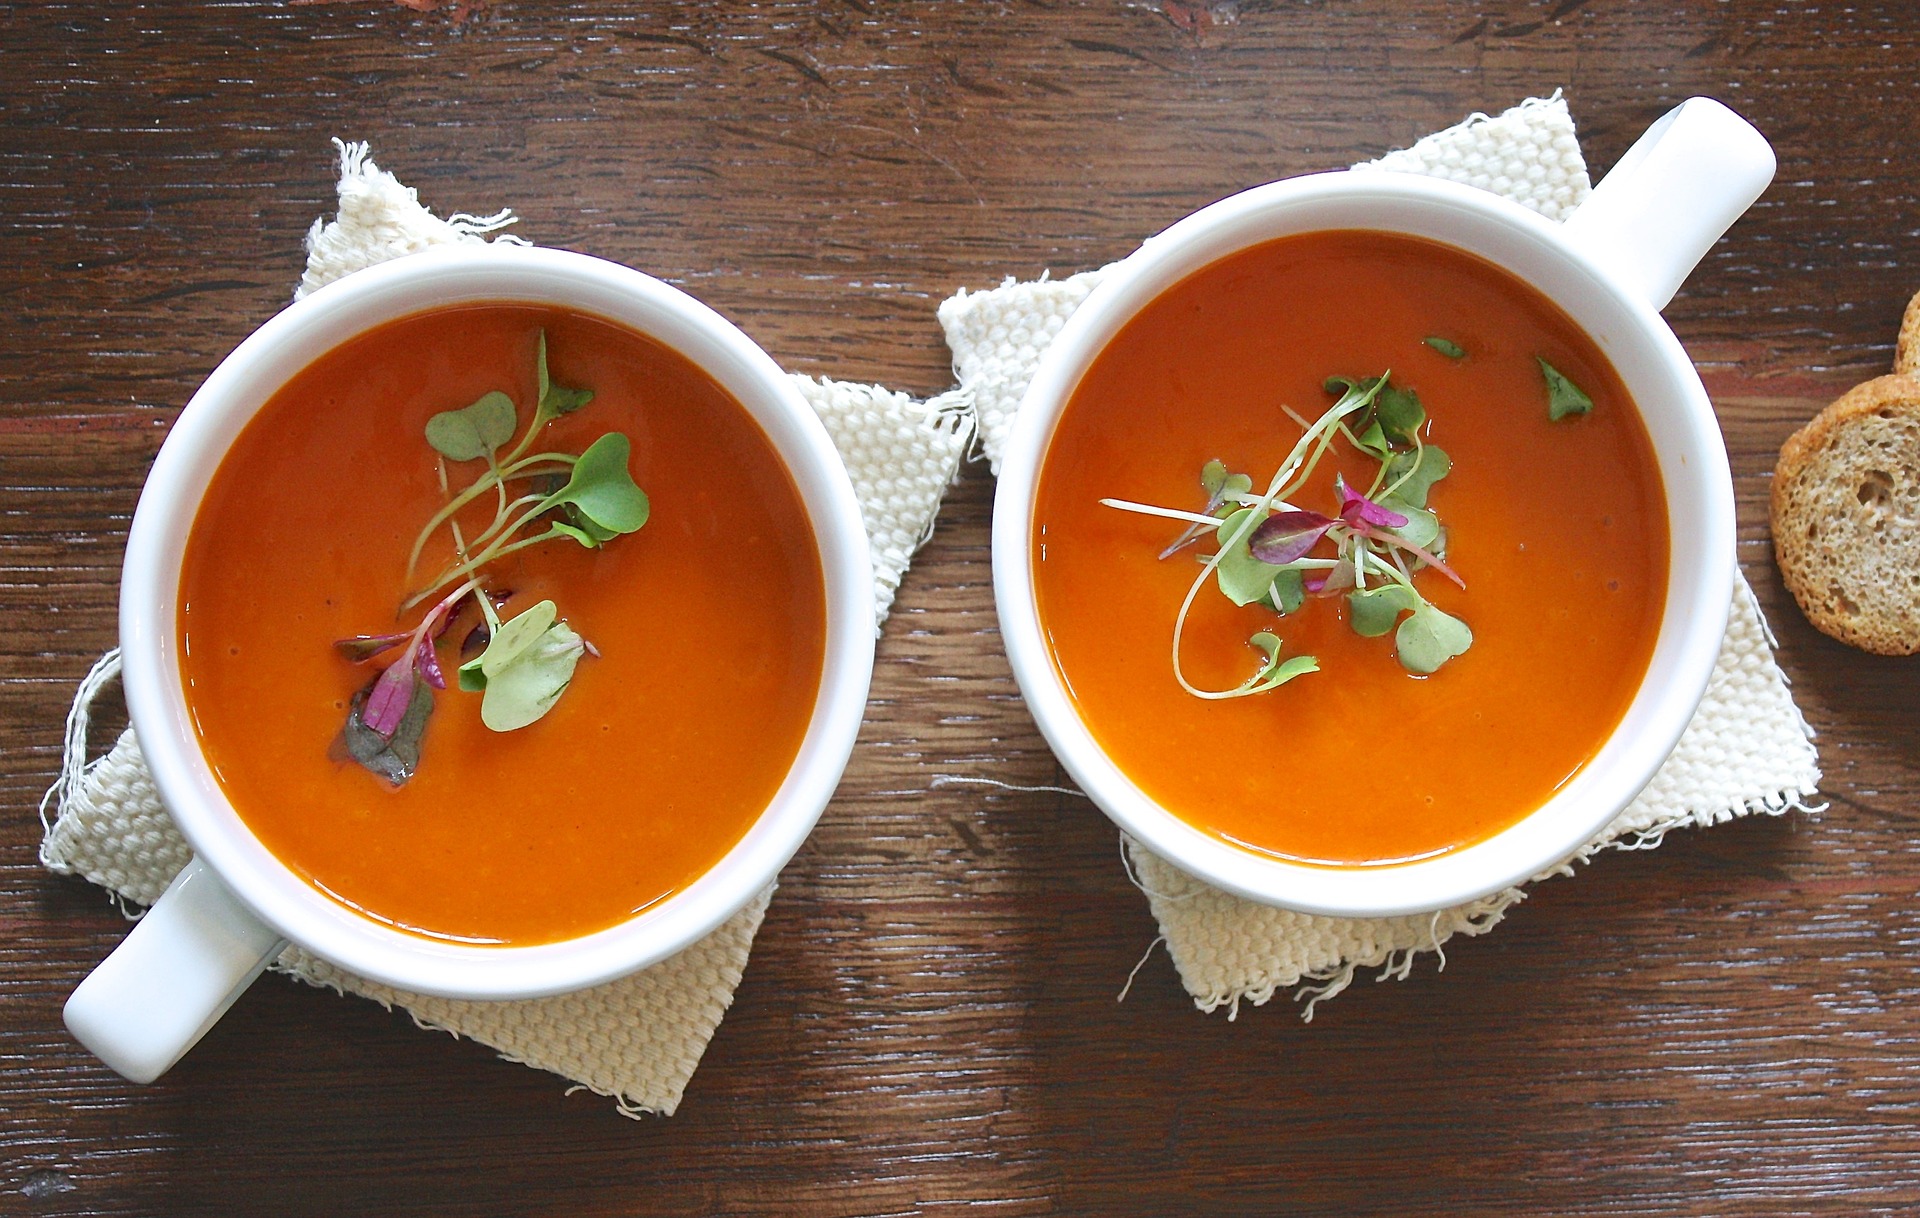 Soup FROM YOUR GARDEN’S HARVEST